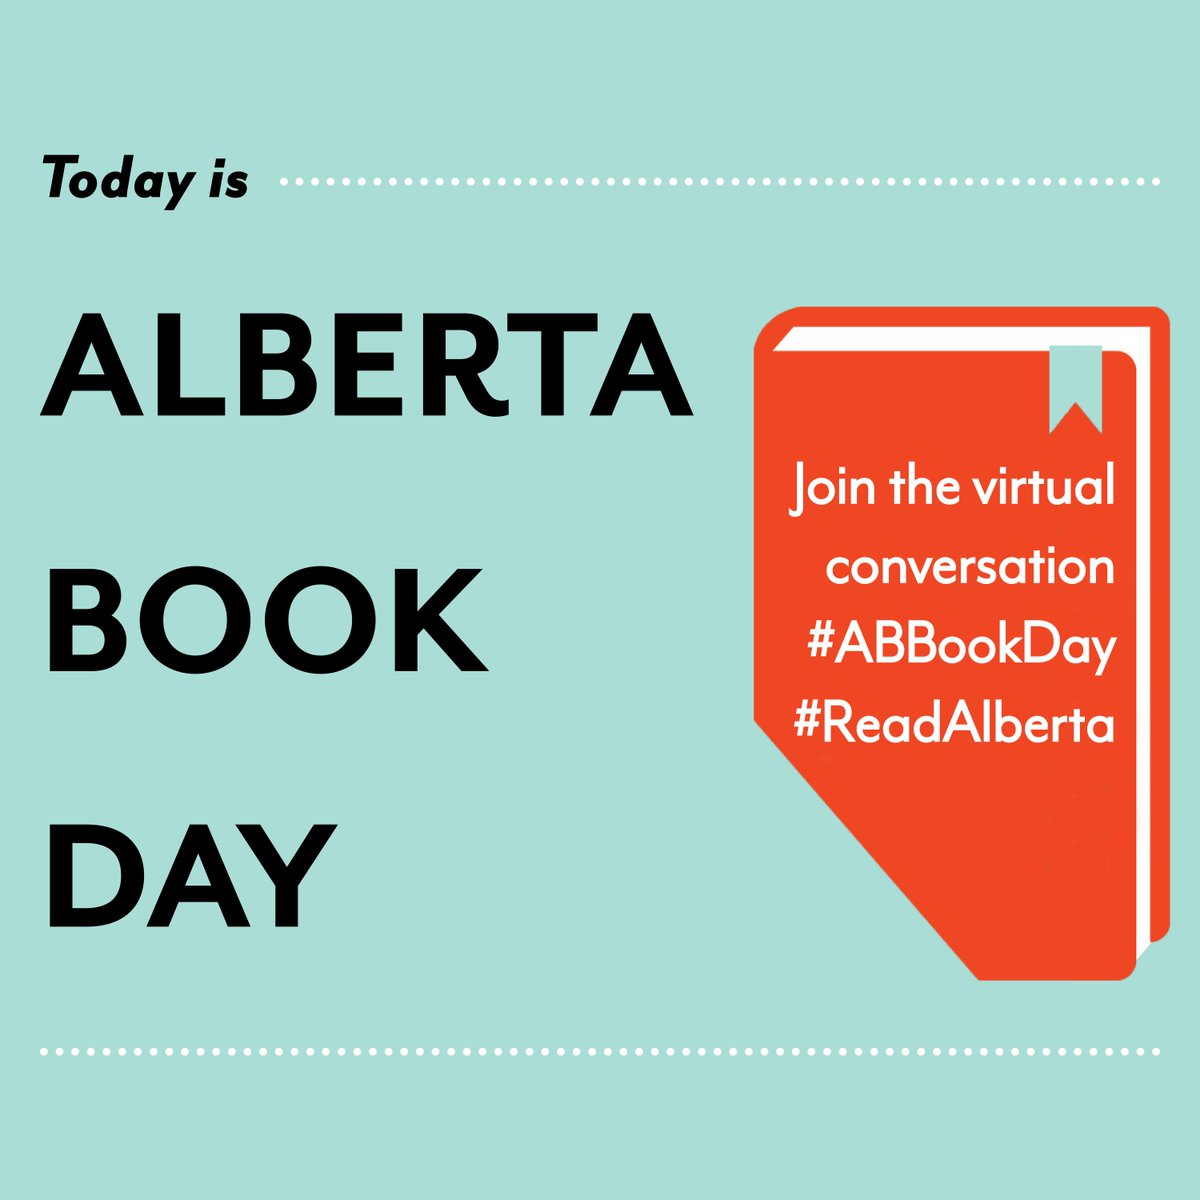 TODAY IS ALBERTA BOOK DAY! We'll be at the Legislature to showcase the contributions that Alberta publishers make to the province's culture & economy. As a publisher, we are committed to supporting our businesses & telling Alberta's story.

#ABBookDay  #ReadAlberta @ABbookpub